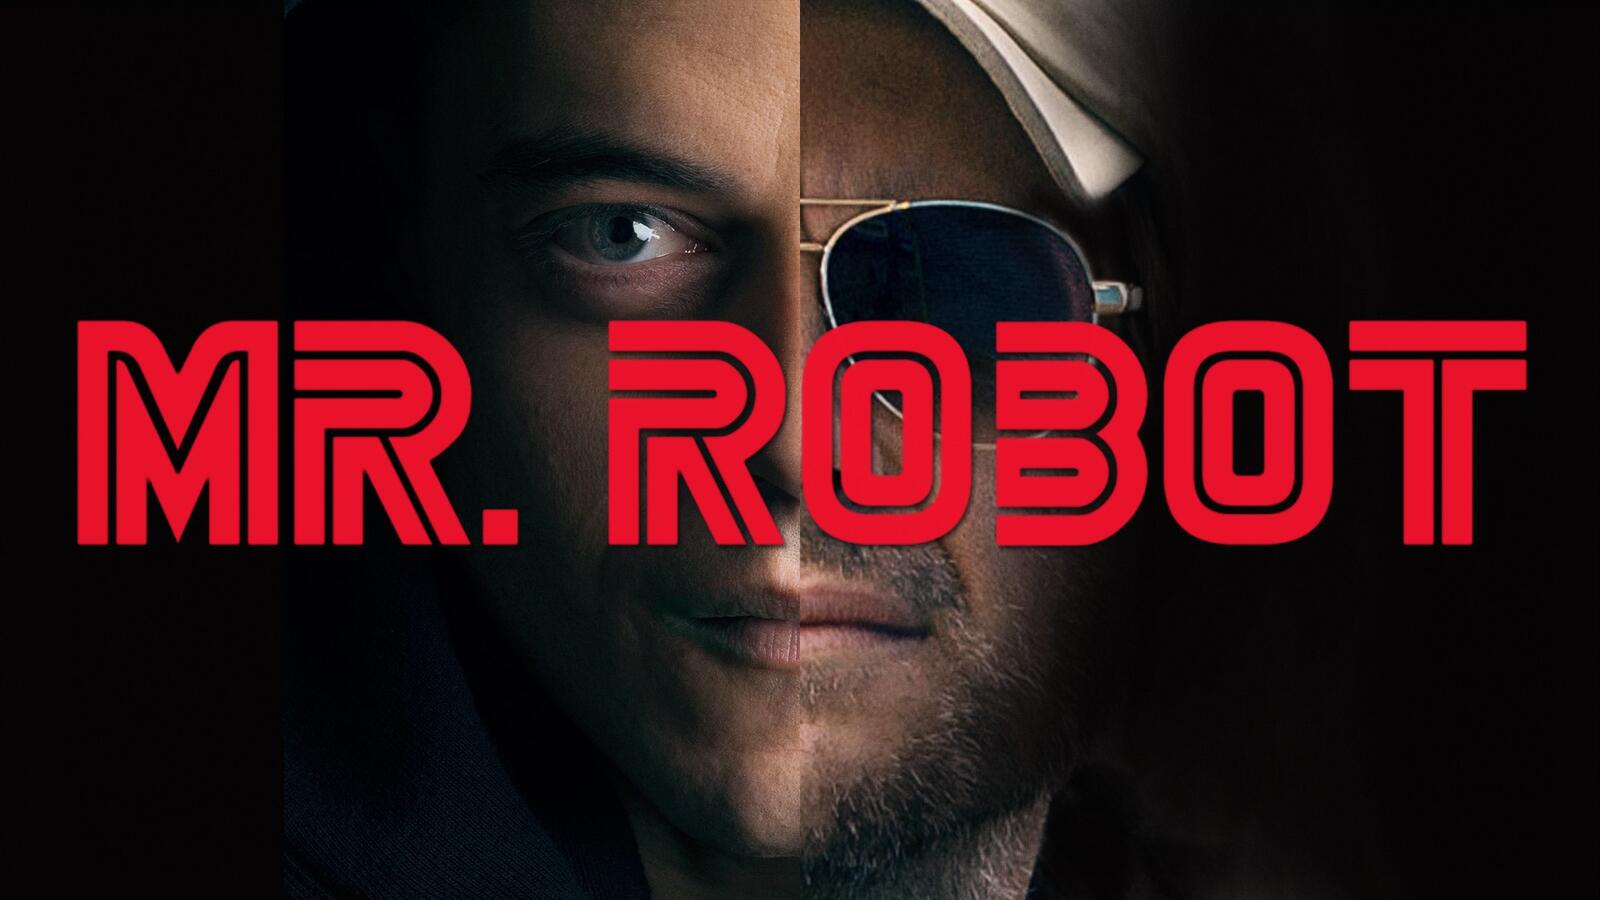 Wallpapers boys movies mr robot on the desktop